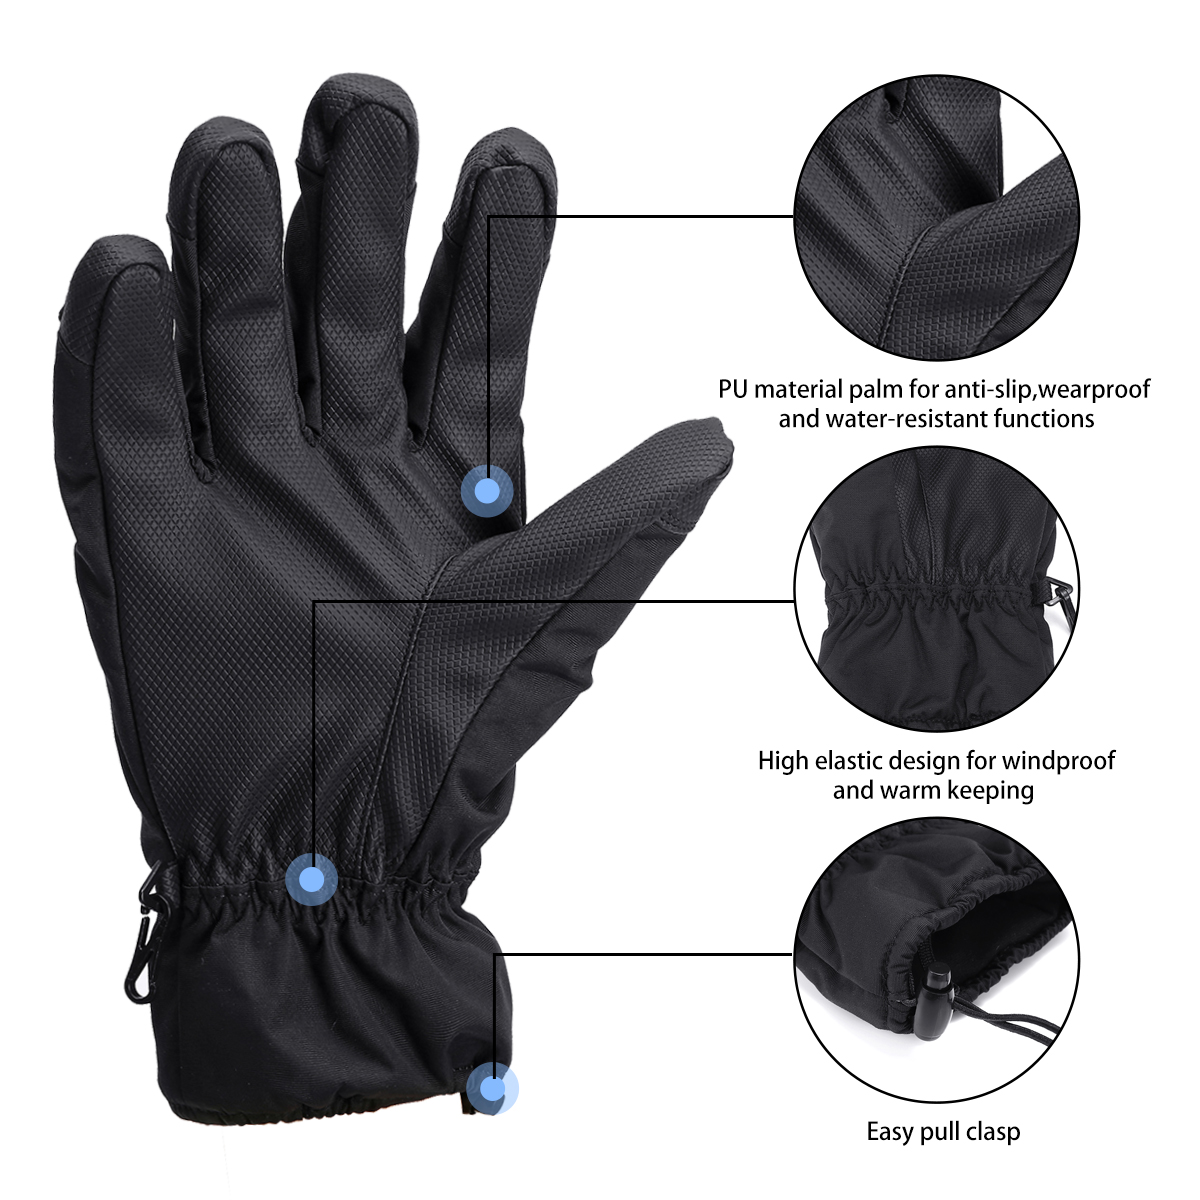 CAMTOA-Winter-Skiing-Gloves-3M-Thinsulate-Warm-Waterproof-Breathable-Snow-Gloves-for-Men-and-Women-1397724-4